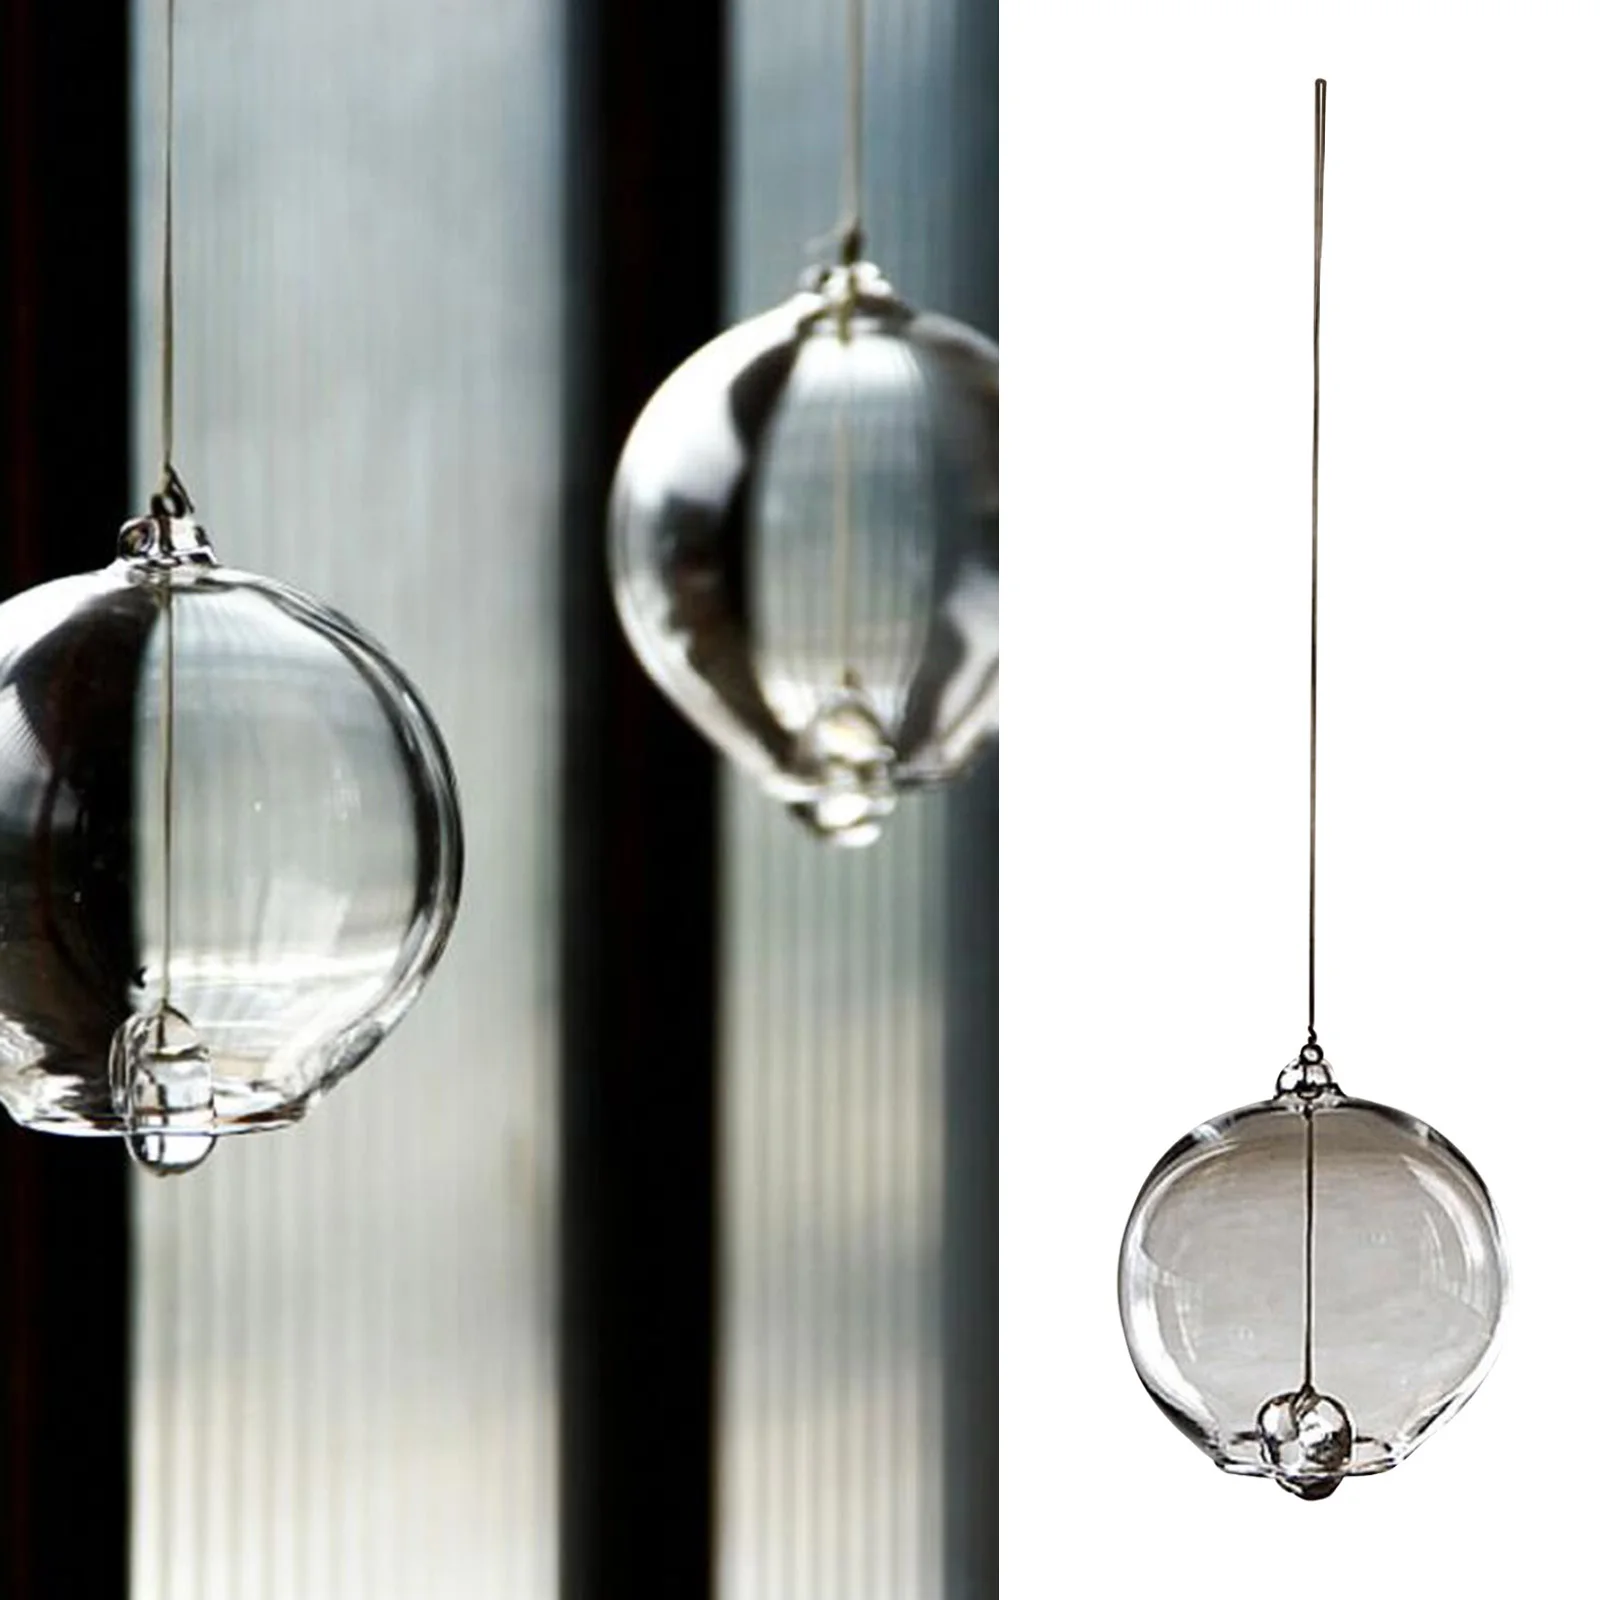 Japanese style glass wind chime wind hanging bells doorbell modern home pendant decoration ornaments